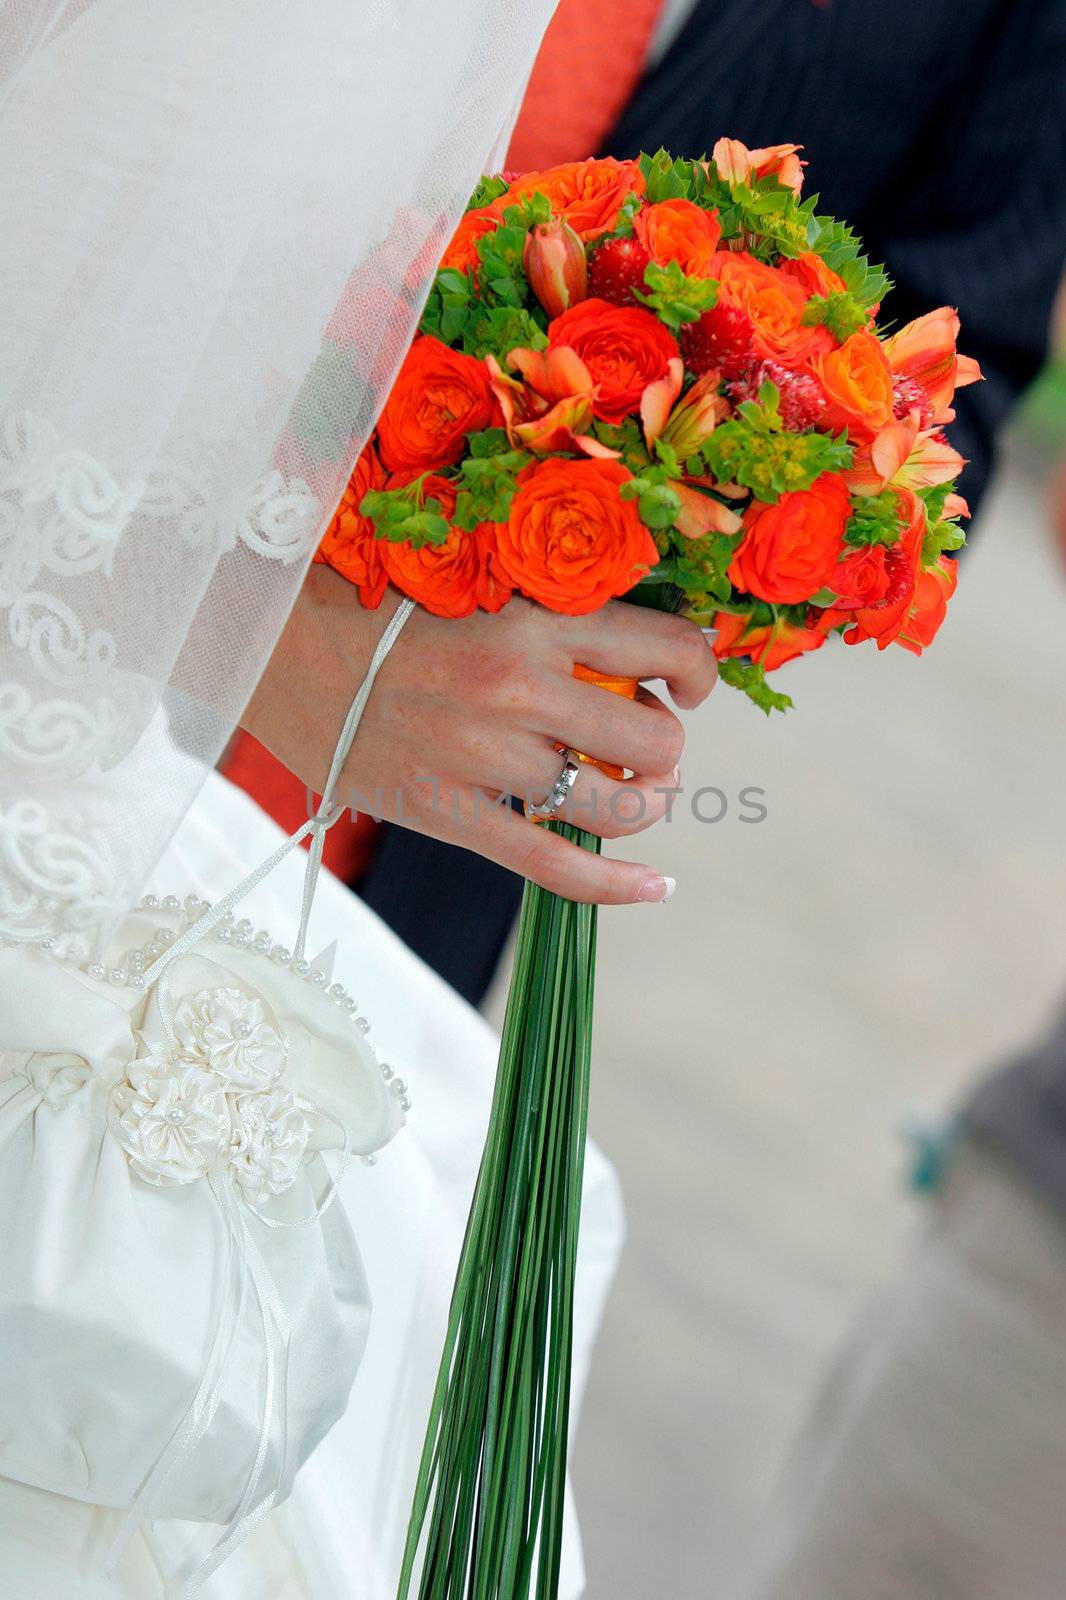 Close up portrait of bride in traditional white wedding dress holding a bouquet of flowers.